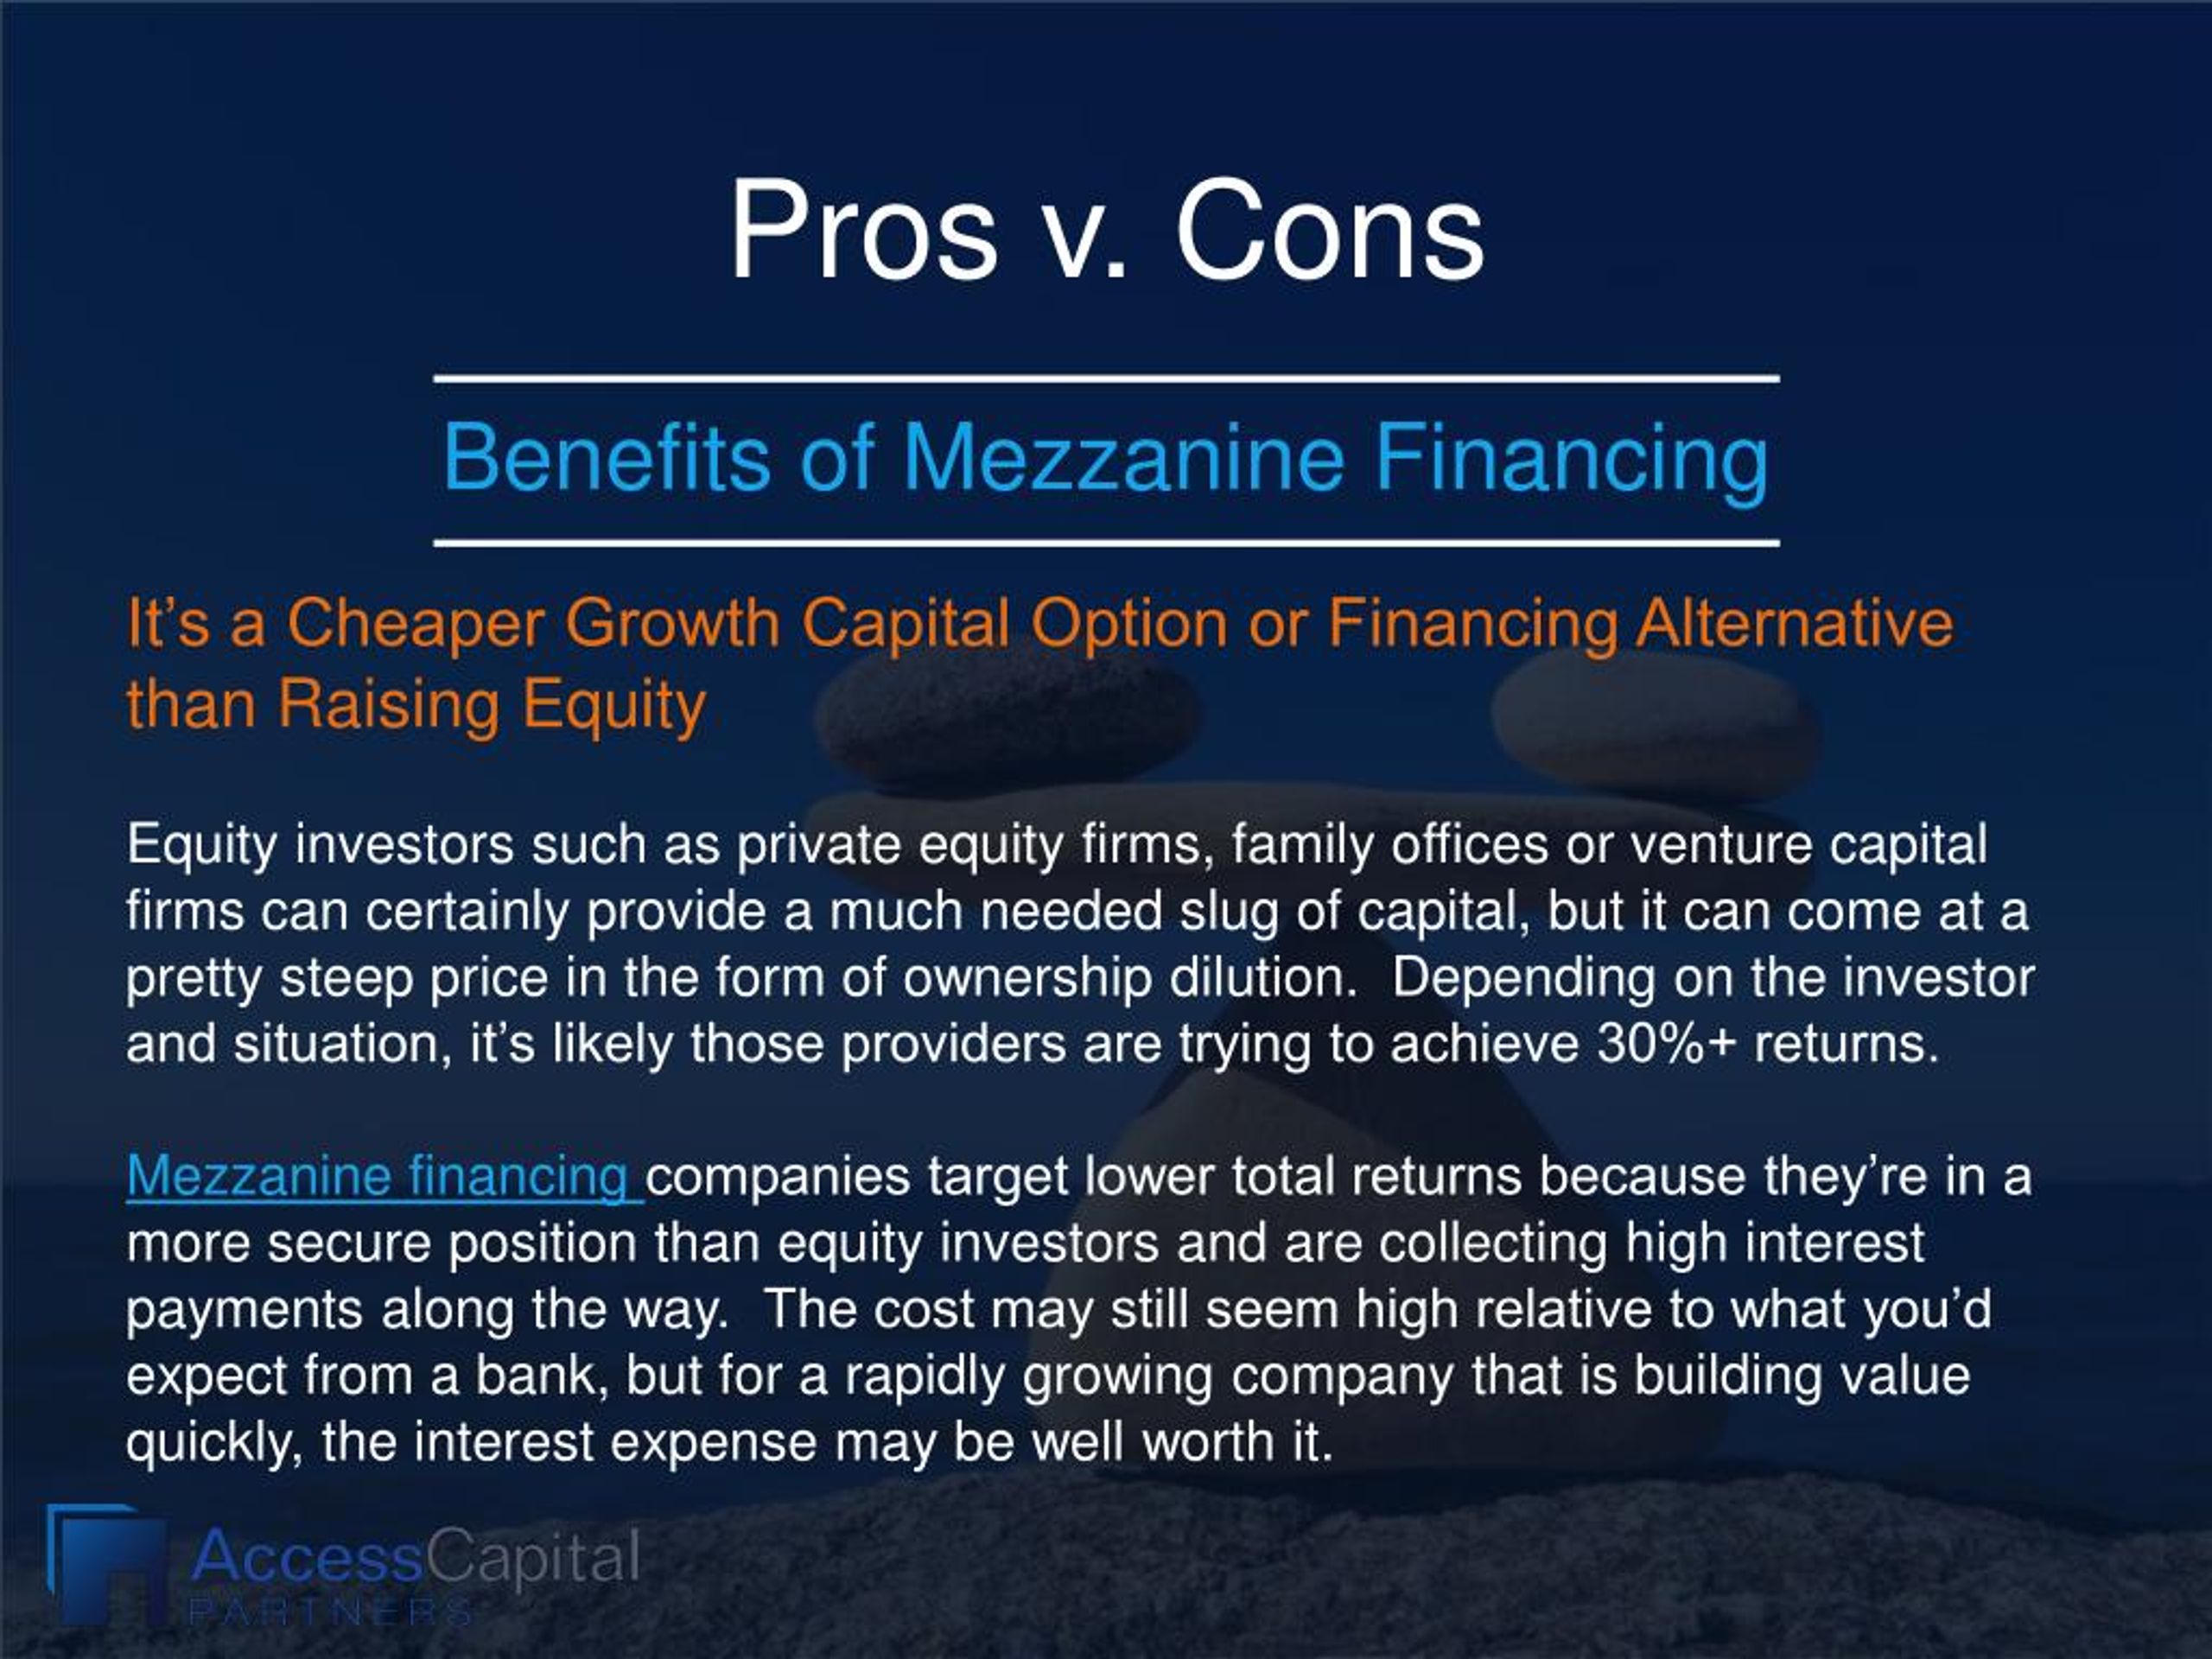 PPT The Growth Capital Guide Leveraging Mezzanine Financing for Growth PowerPoint